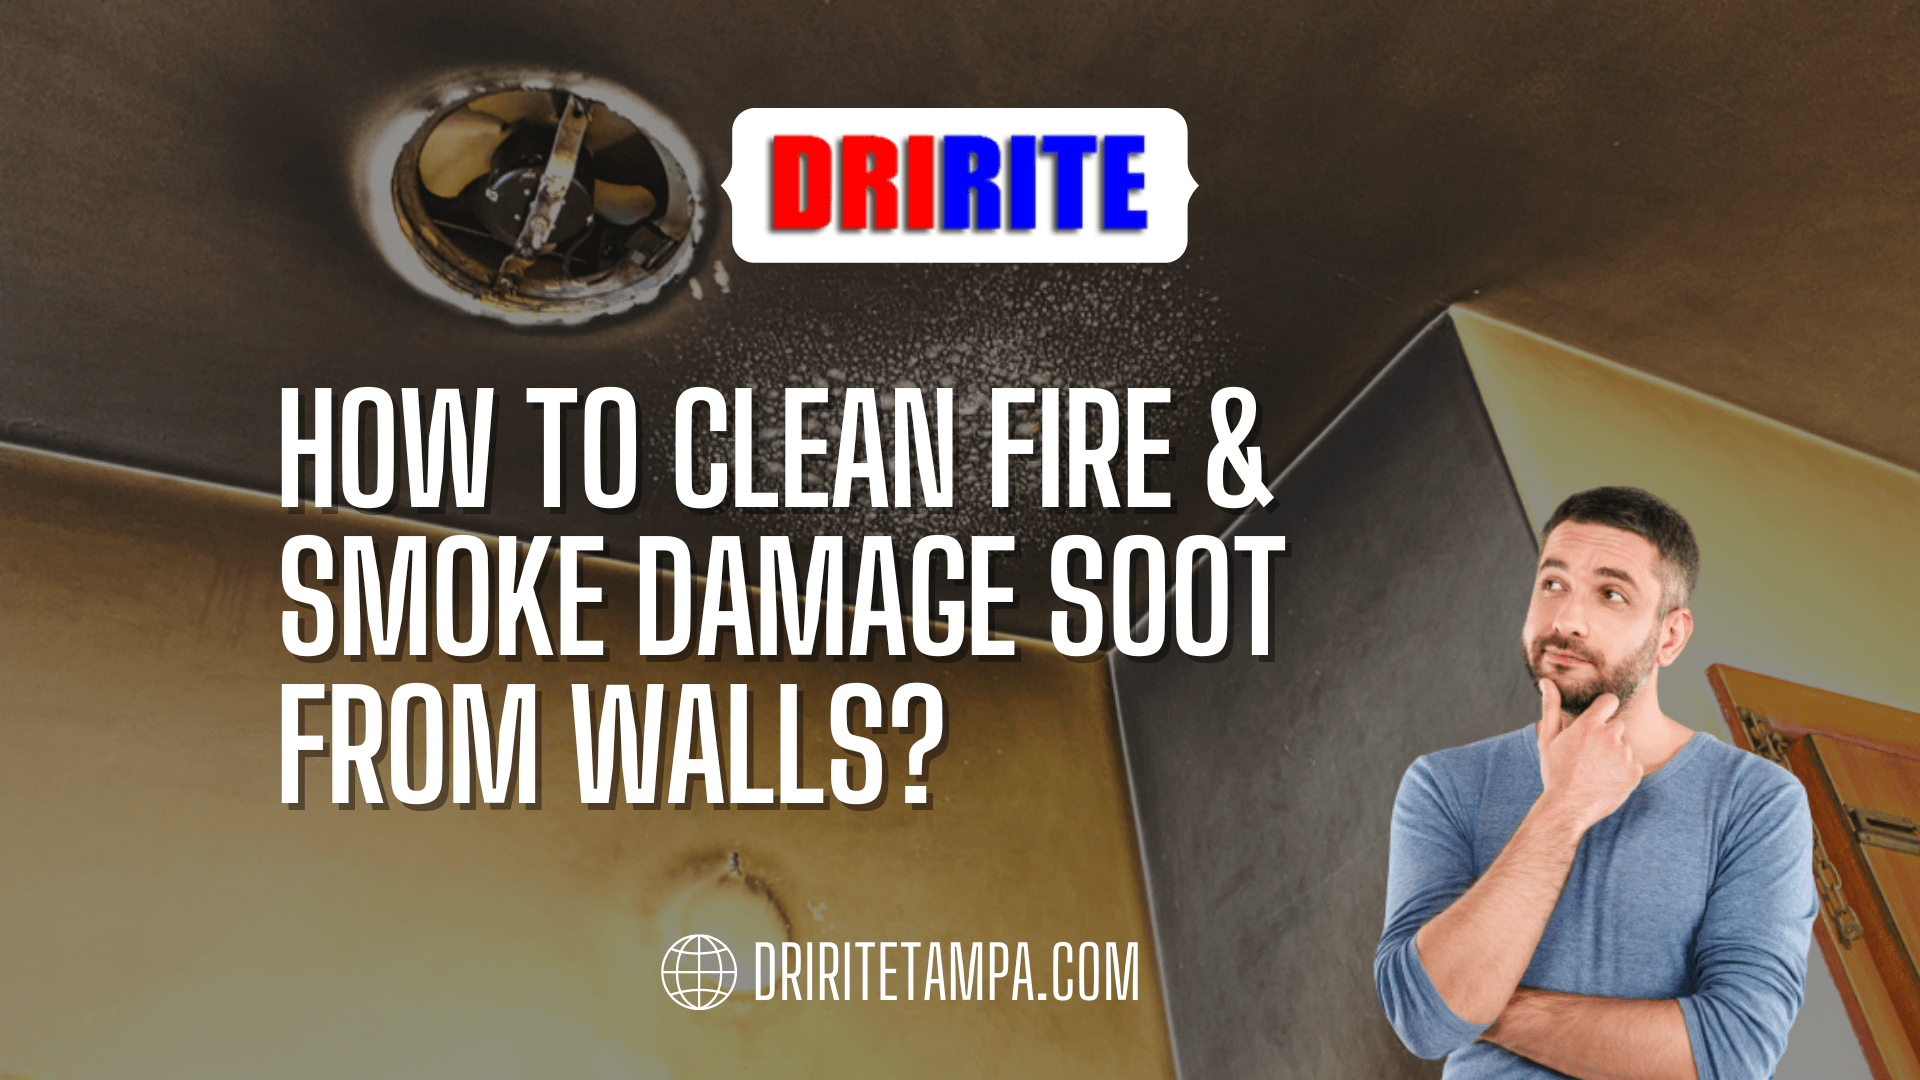 How To Clean Fire & Smoke Damage Soot From Walls